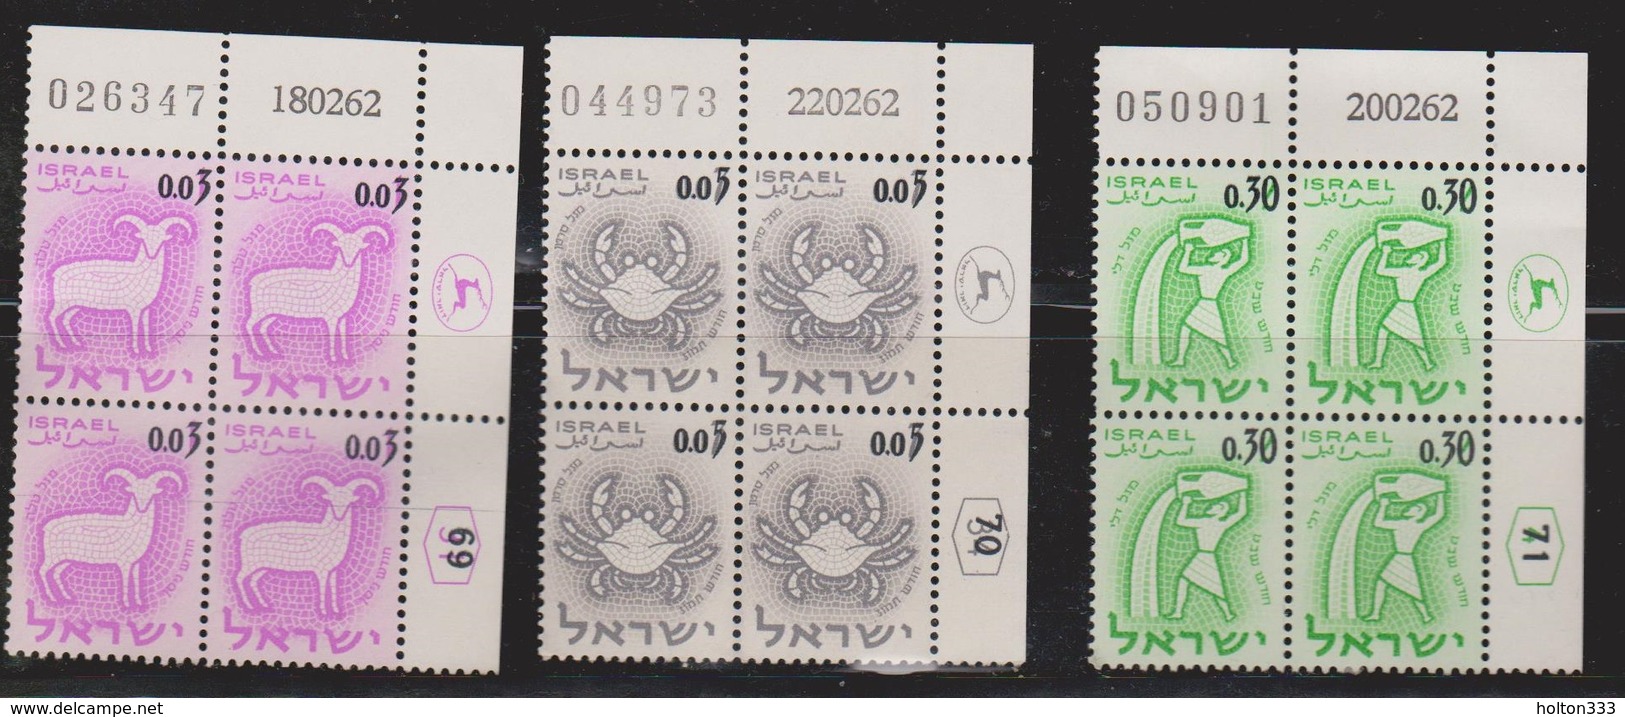 ISRAEL Scott # 215-7 MNH Plate Blocks - Zodiac Stamps Surcharged - Unused Stamps (with Tabs)